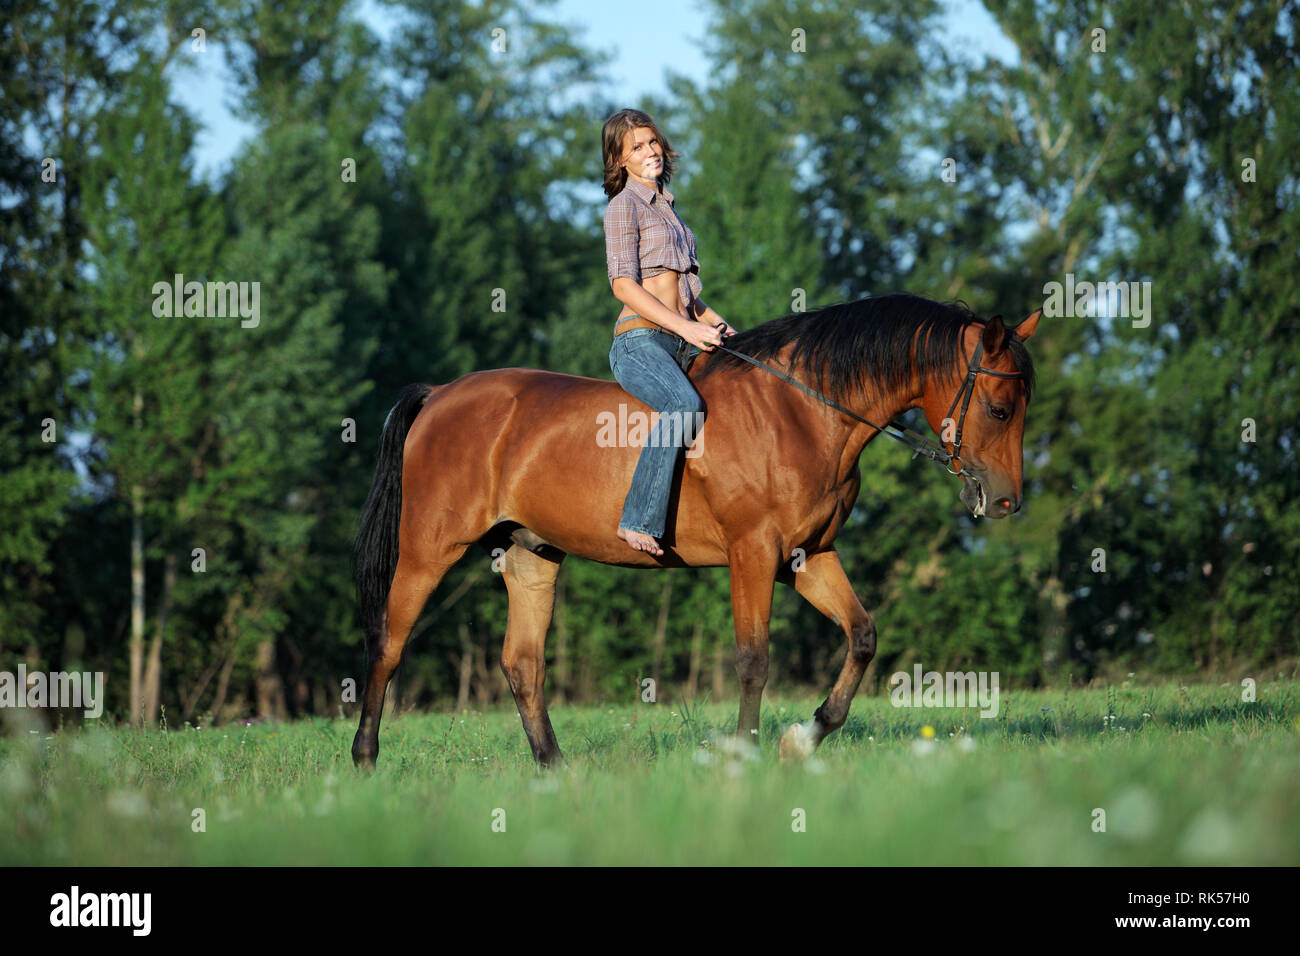 Beautiful cowgirl bareback ride her horse in woods glade at sunset Stock Photo